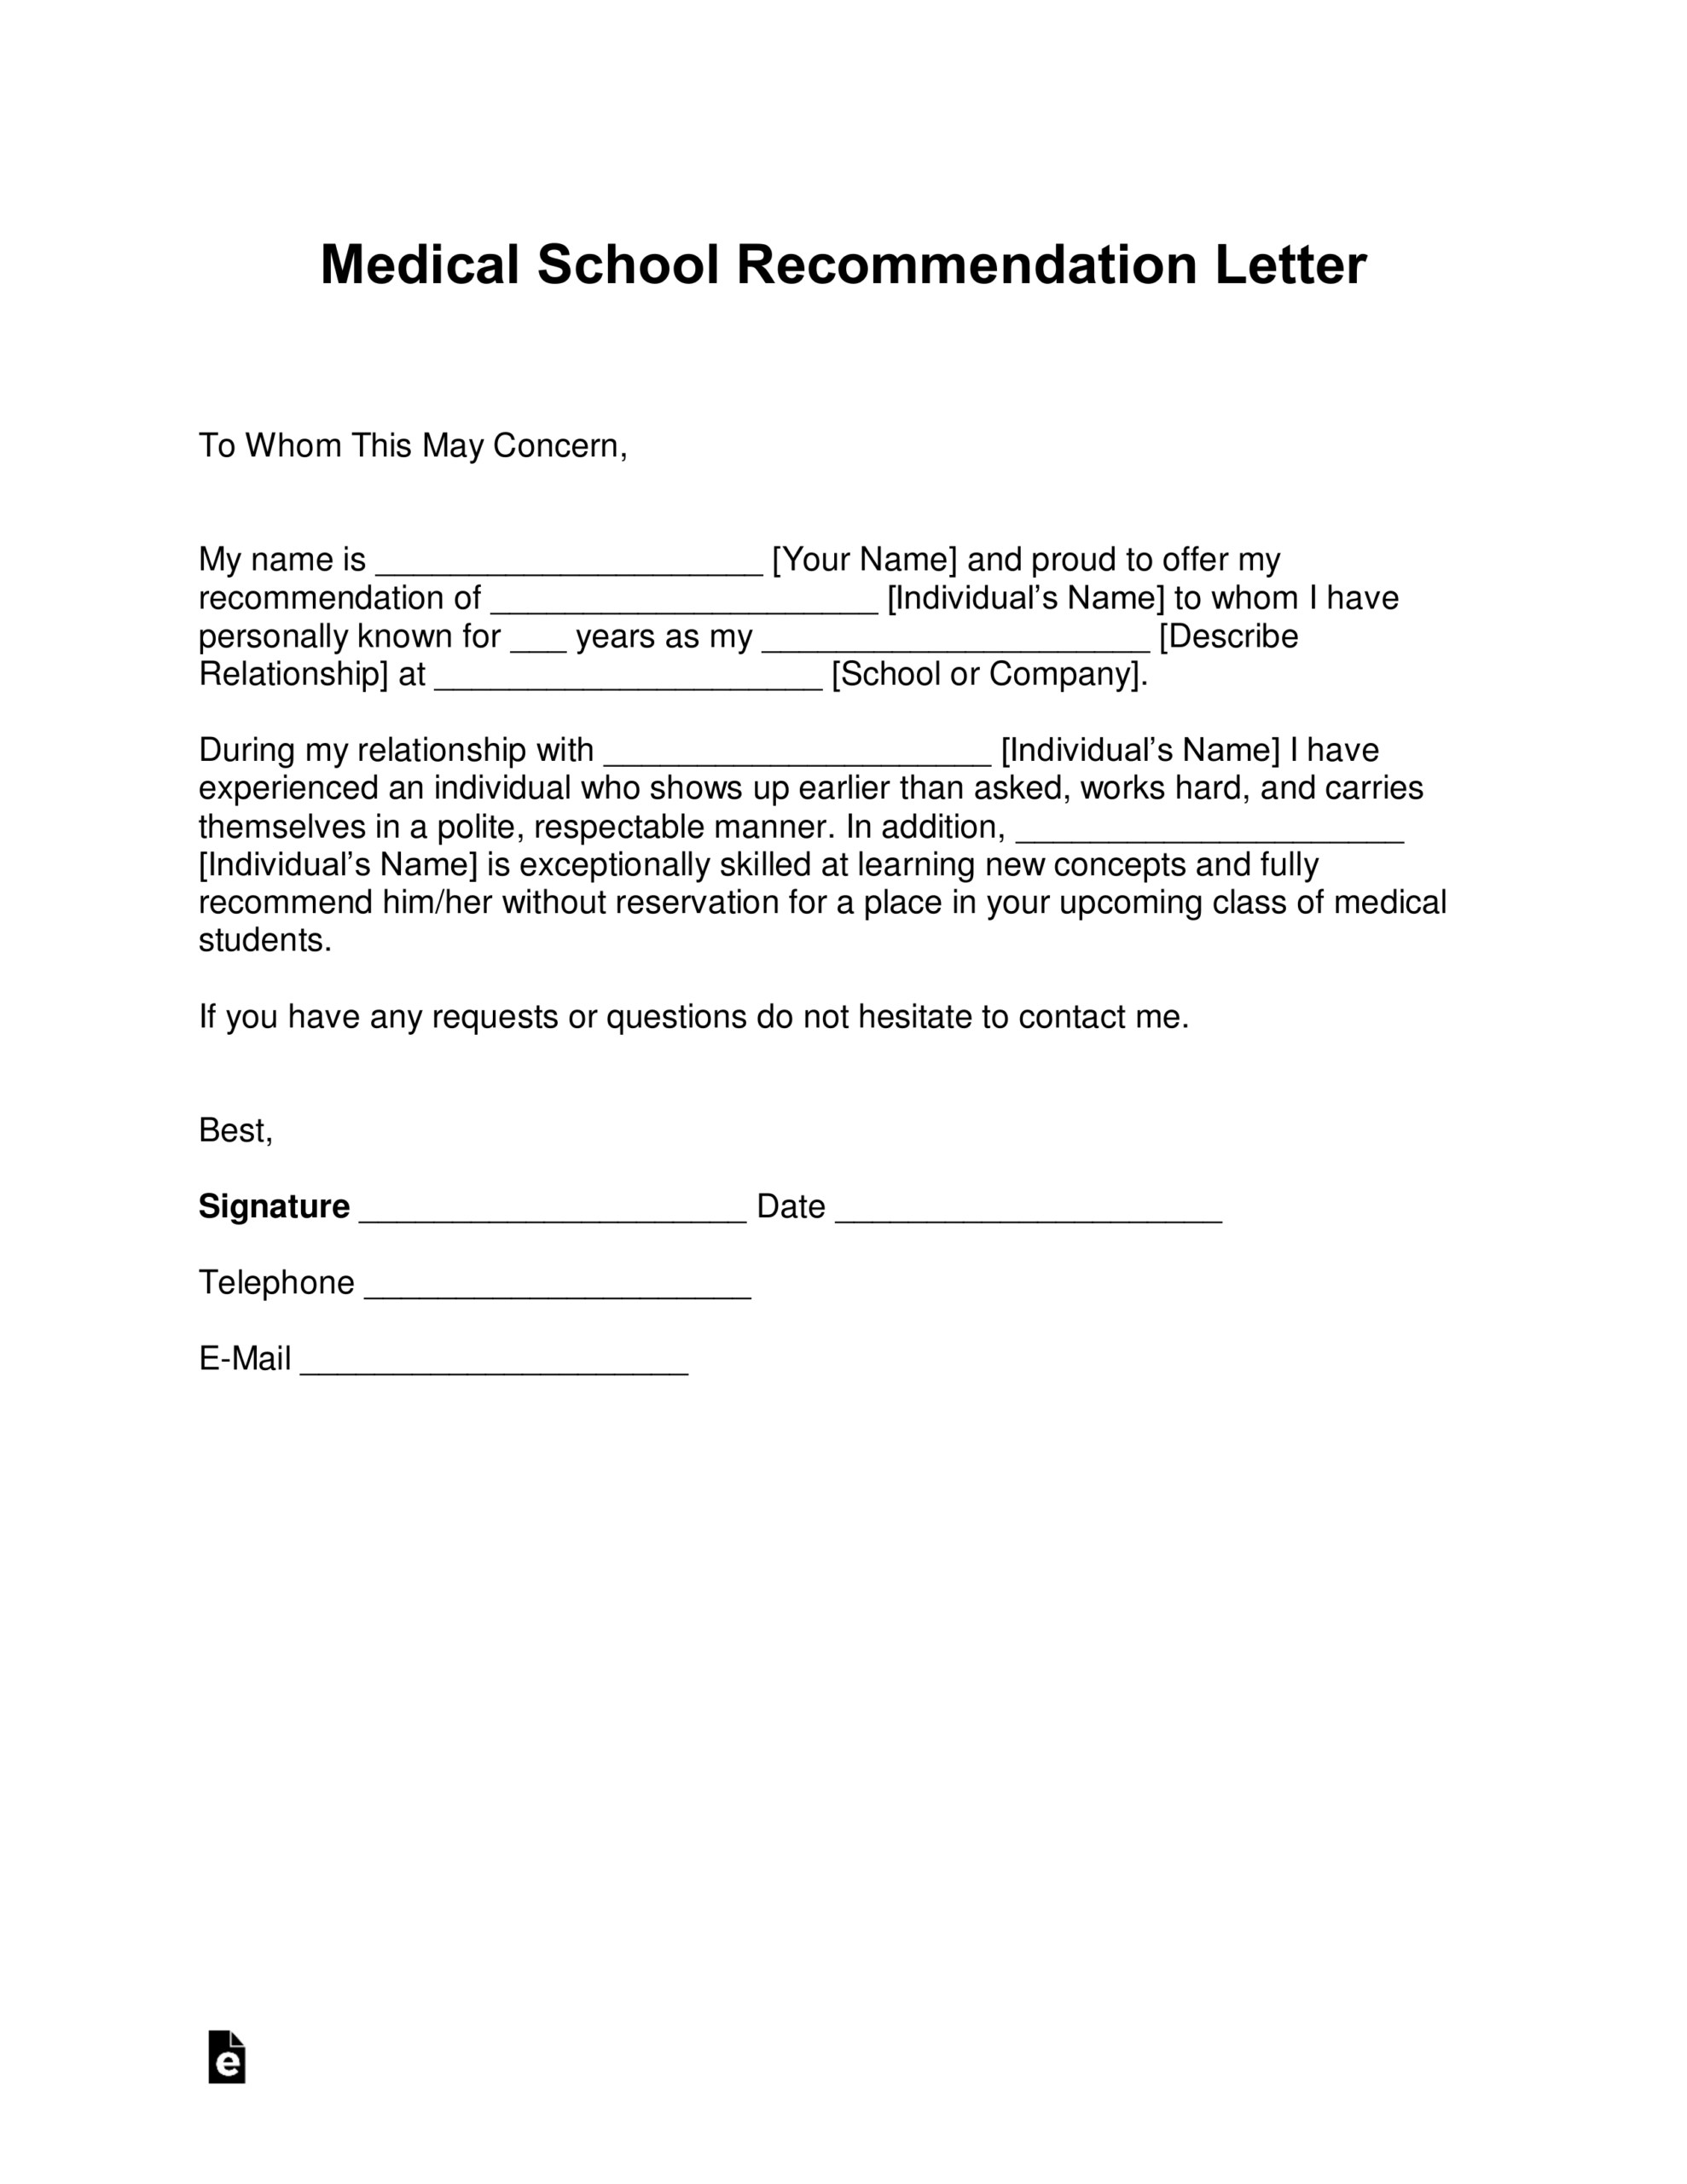 How To Write Recommendation Letter For Medical School Throughout Medical School Letter Of Recommendation Template